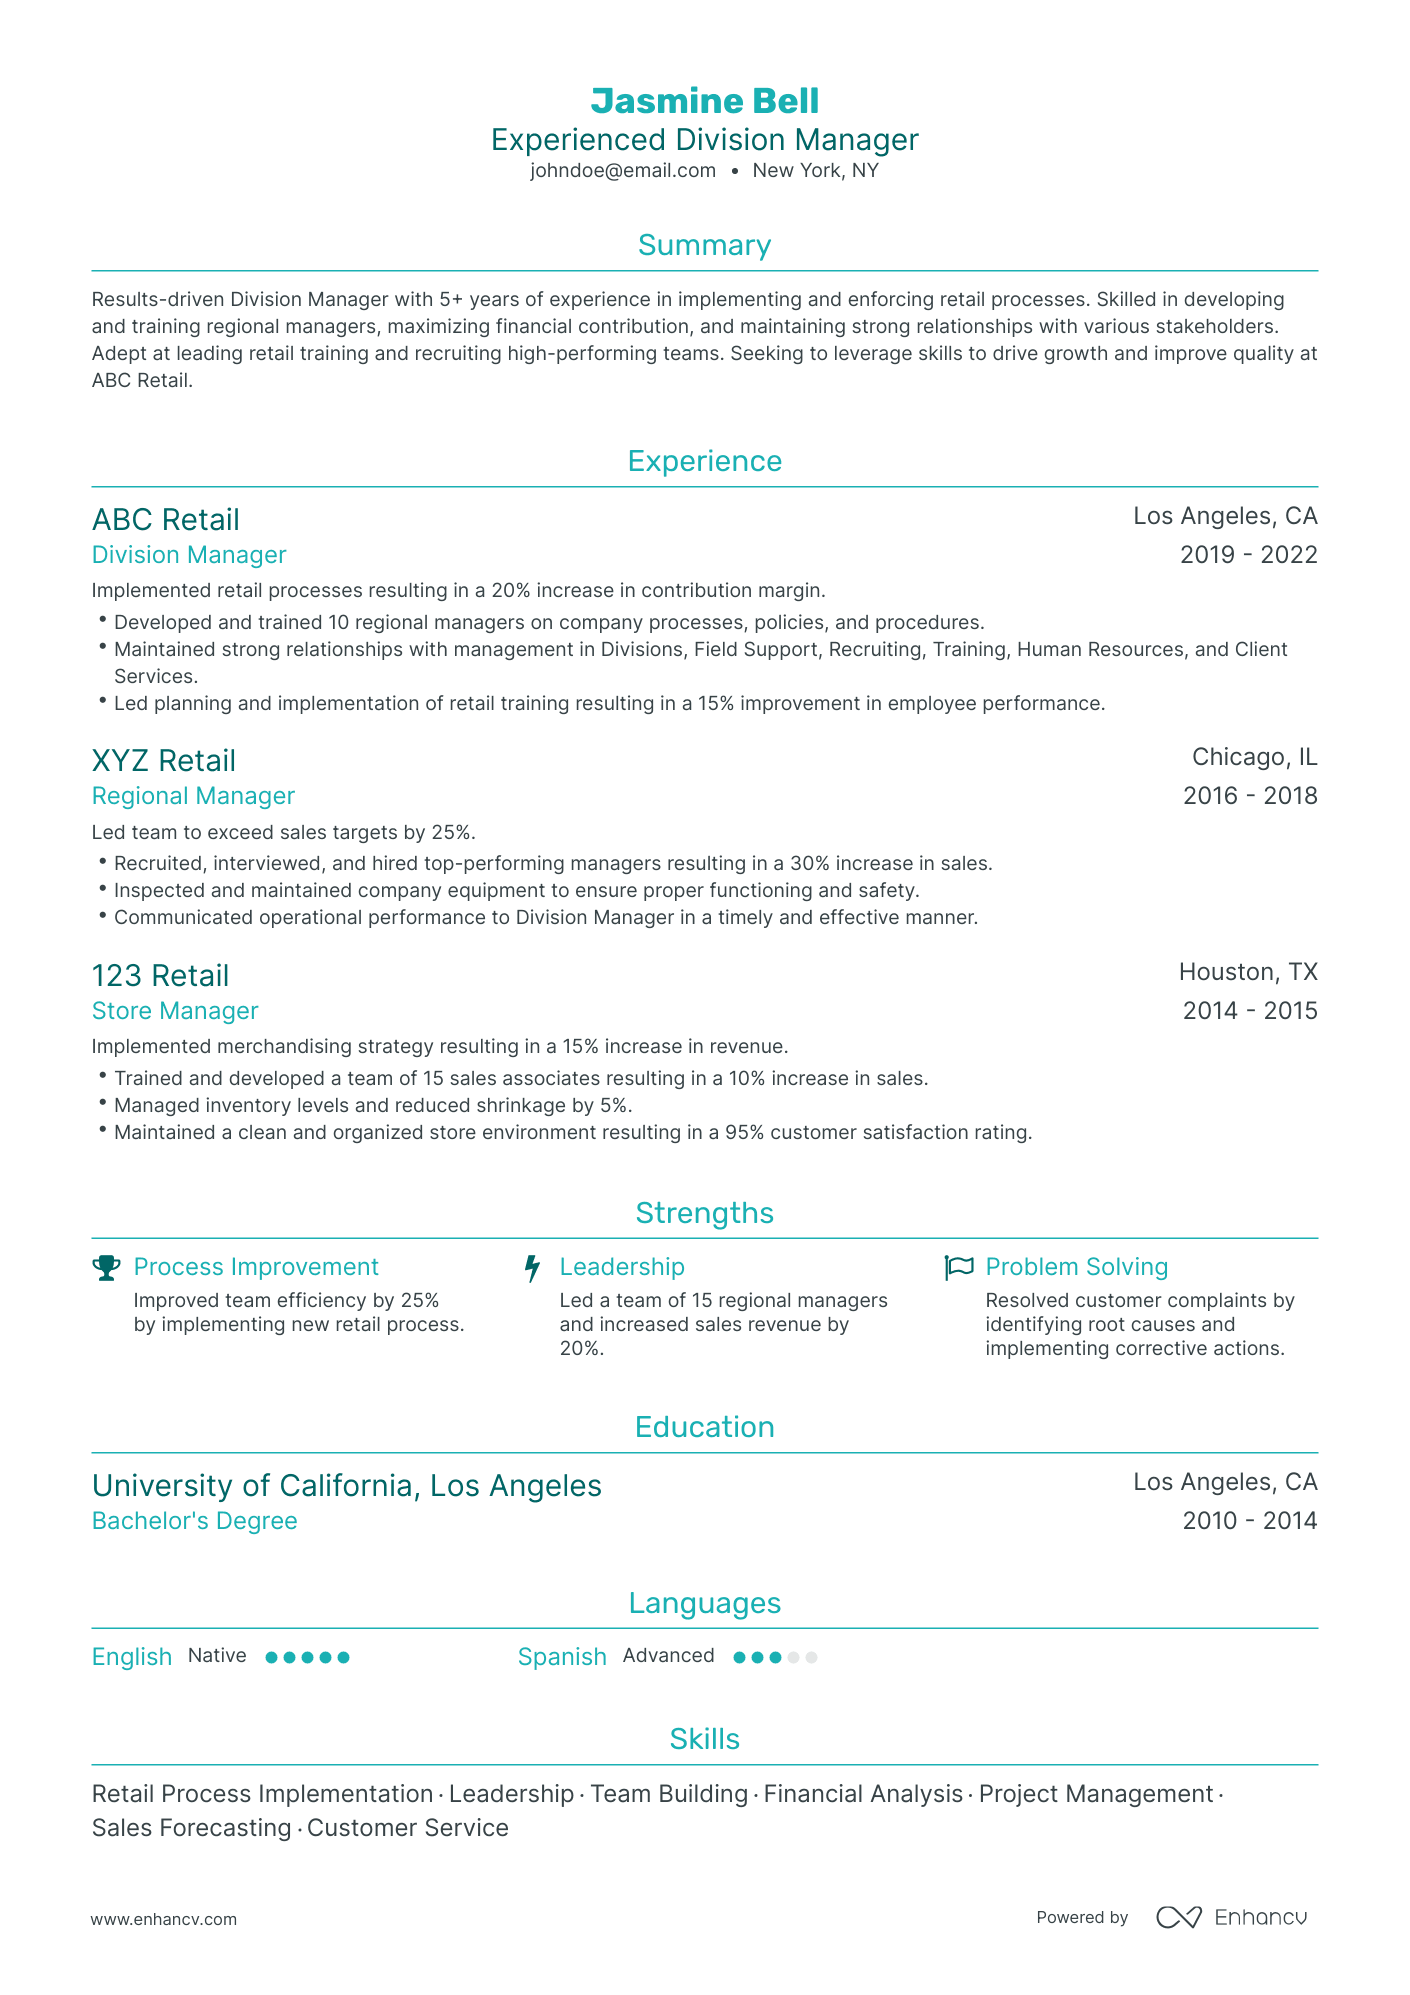 Traditional Division Manager Resume Template